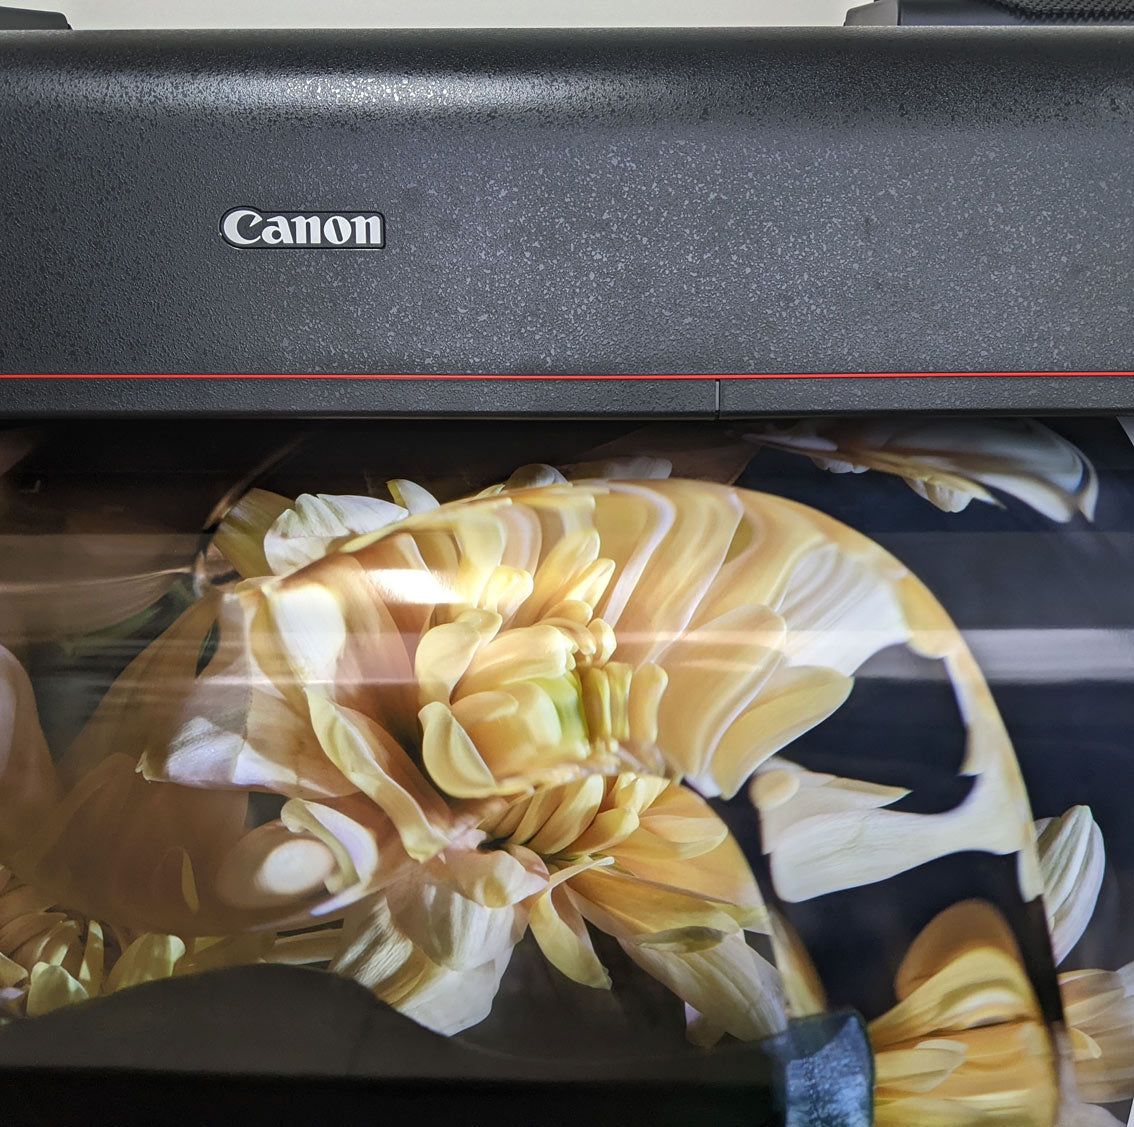 A metallic paper print coming out of Canon 4100 printer